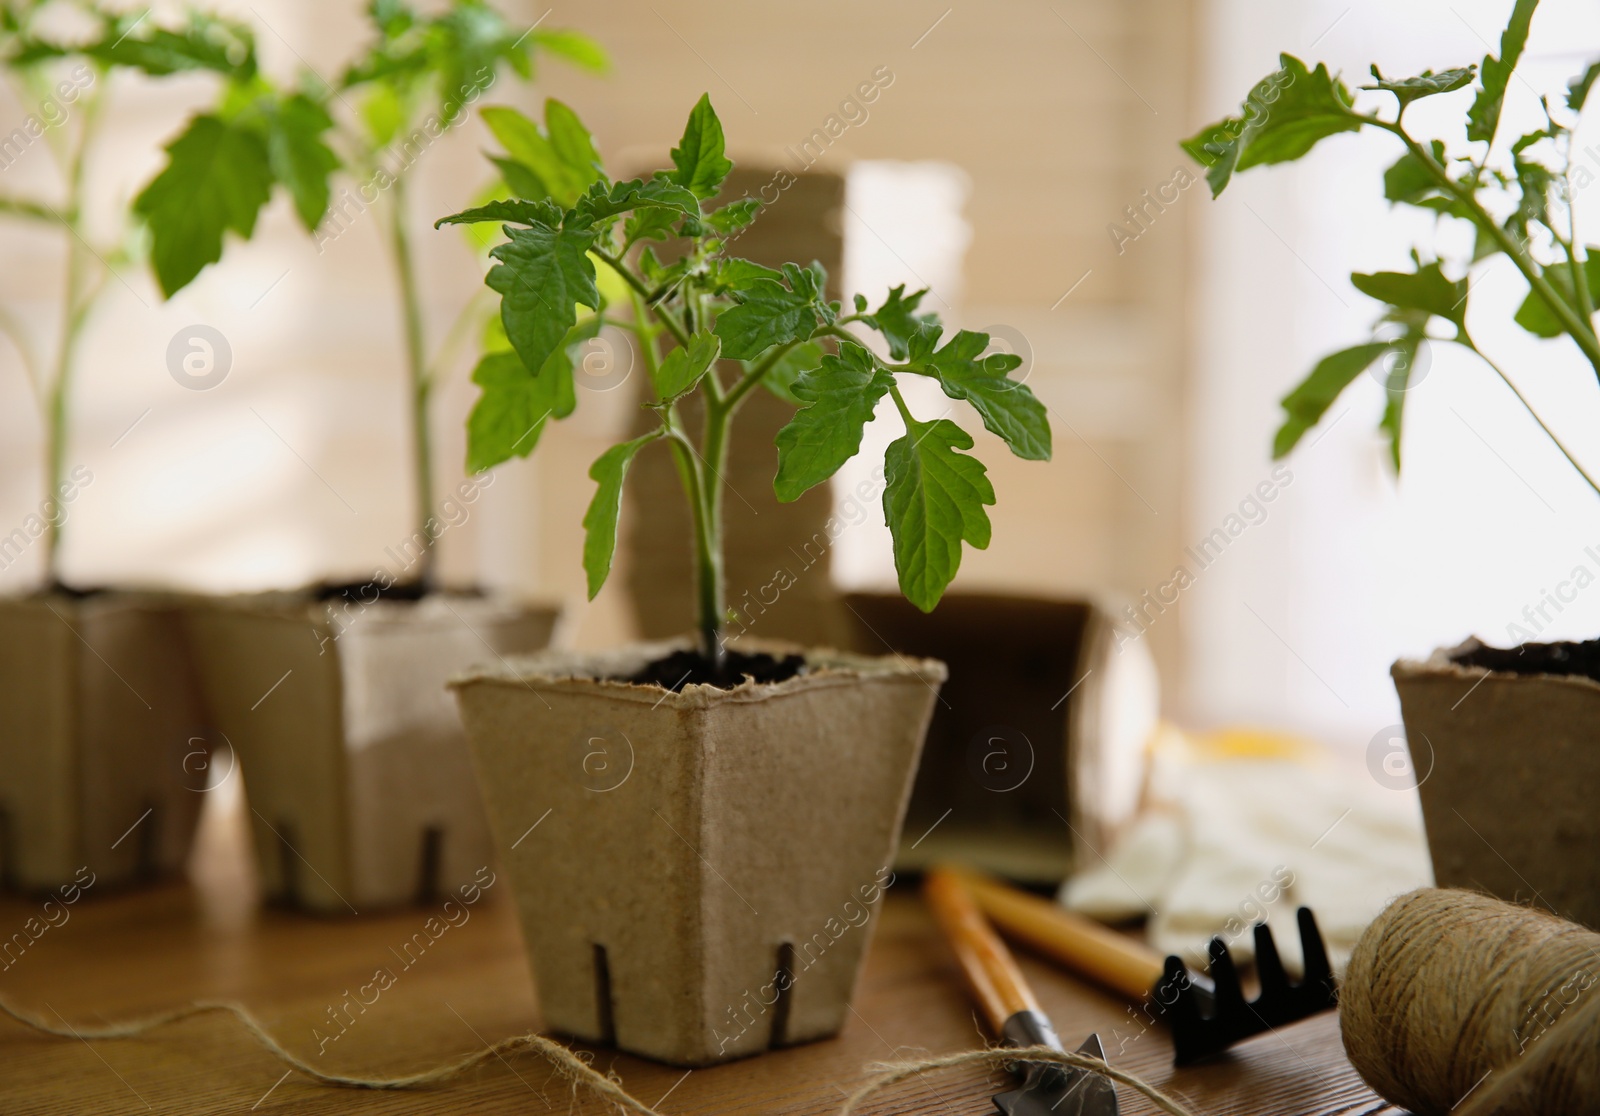 Photo of Gardening tools, rope and green tomato seedling in peat pot on wooden table